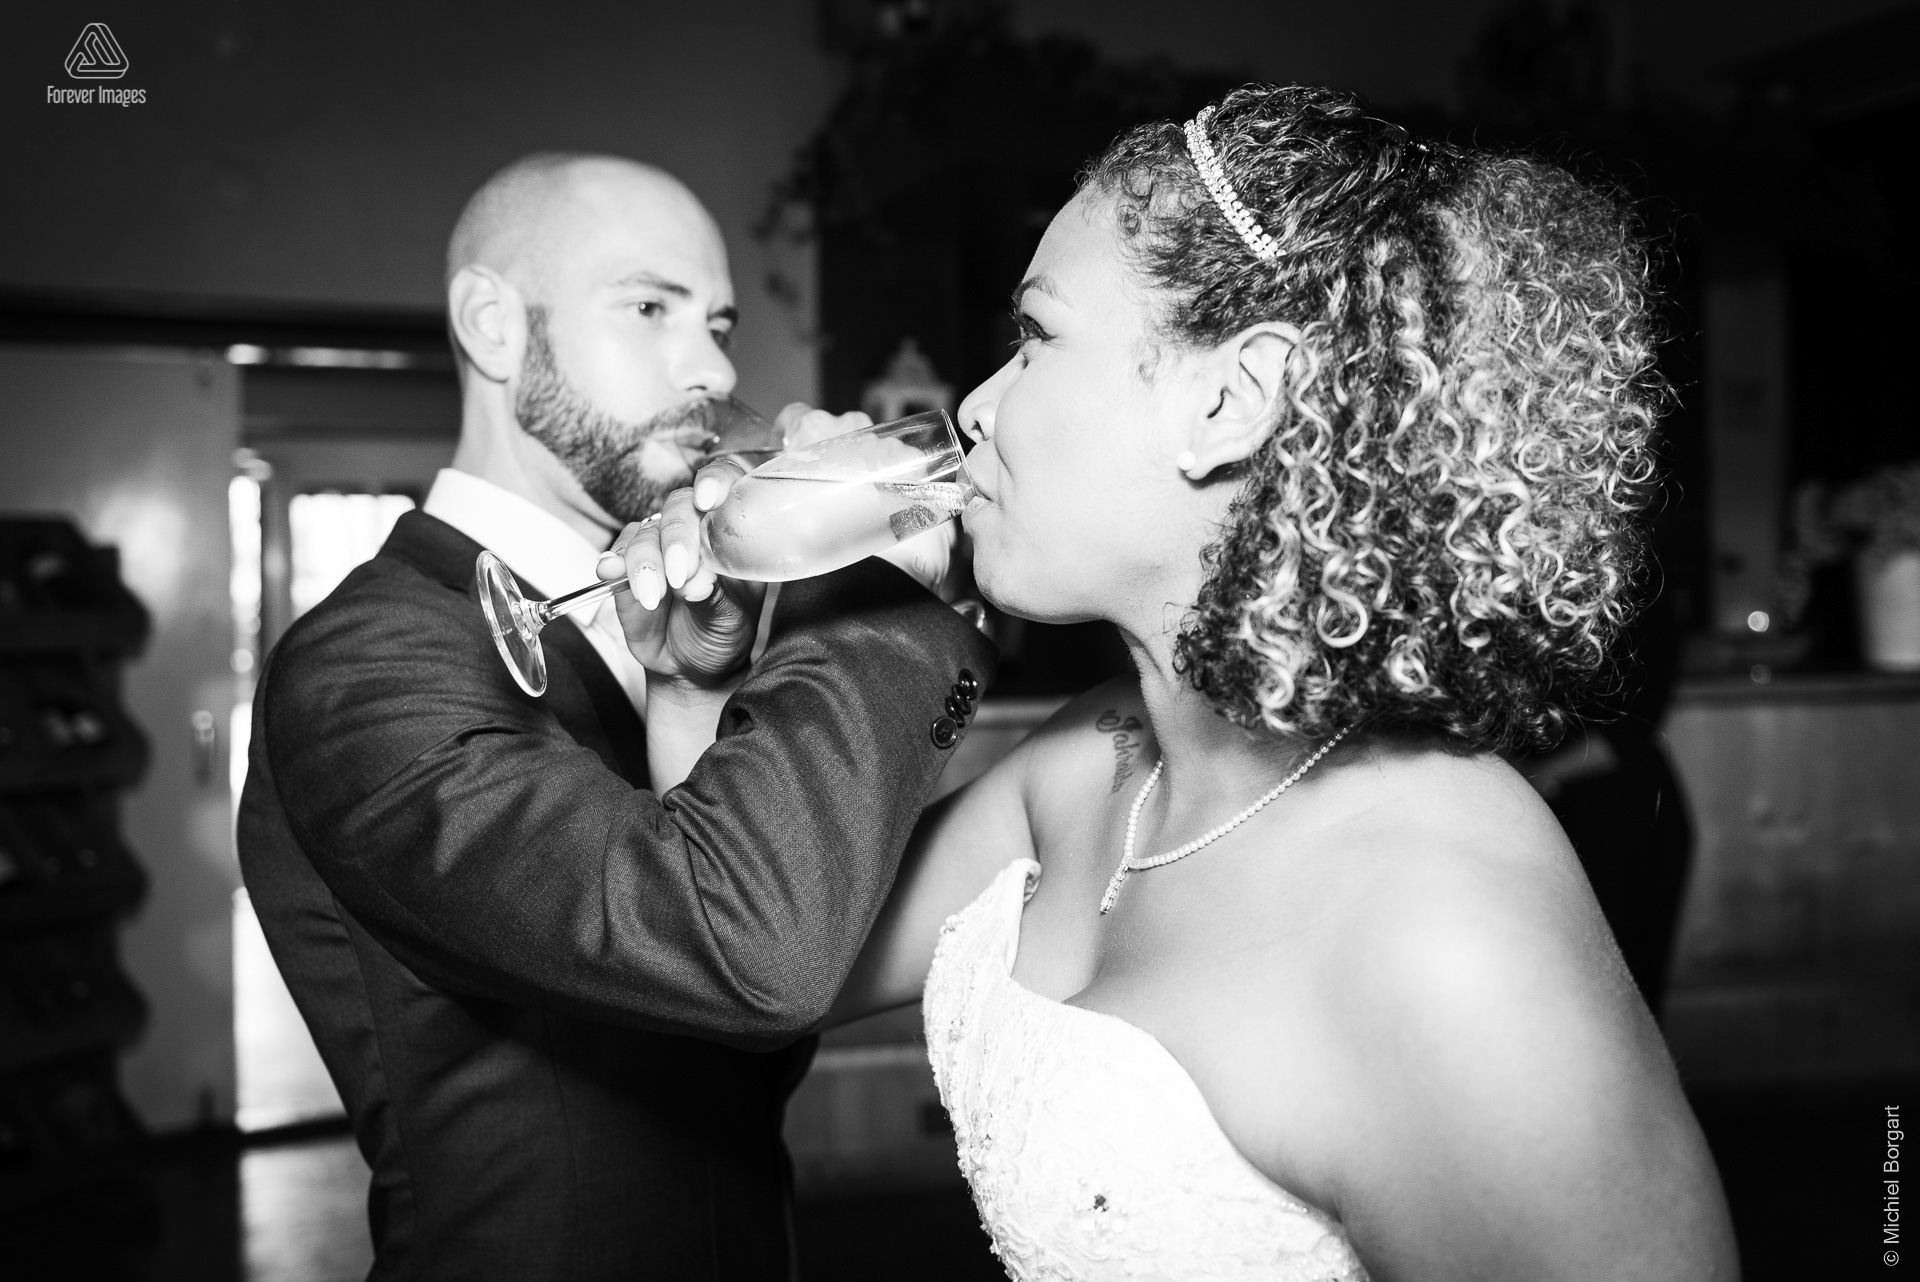 Bridal photo black and white B&W finally the cheers | Kamiel Elseric | Wedding Photographer Michiel Borgart - Forever Images.